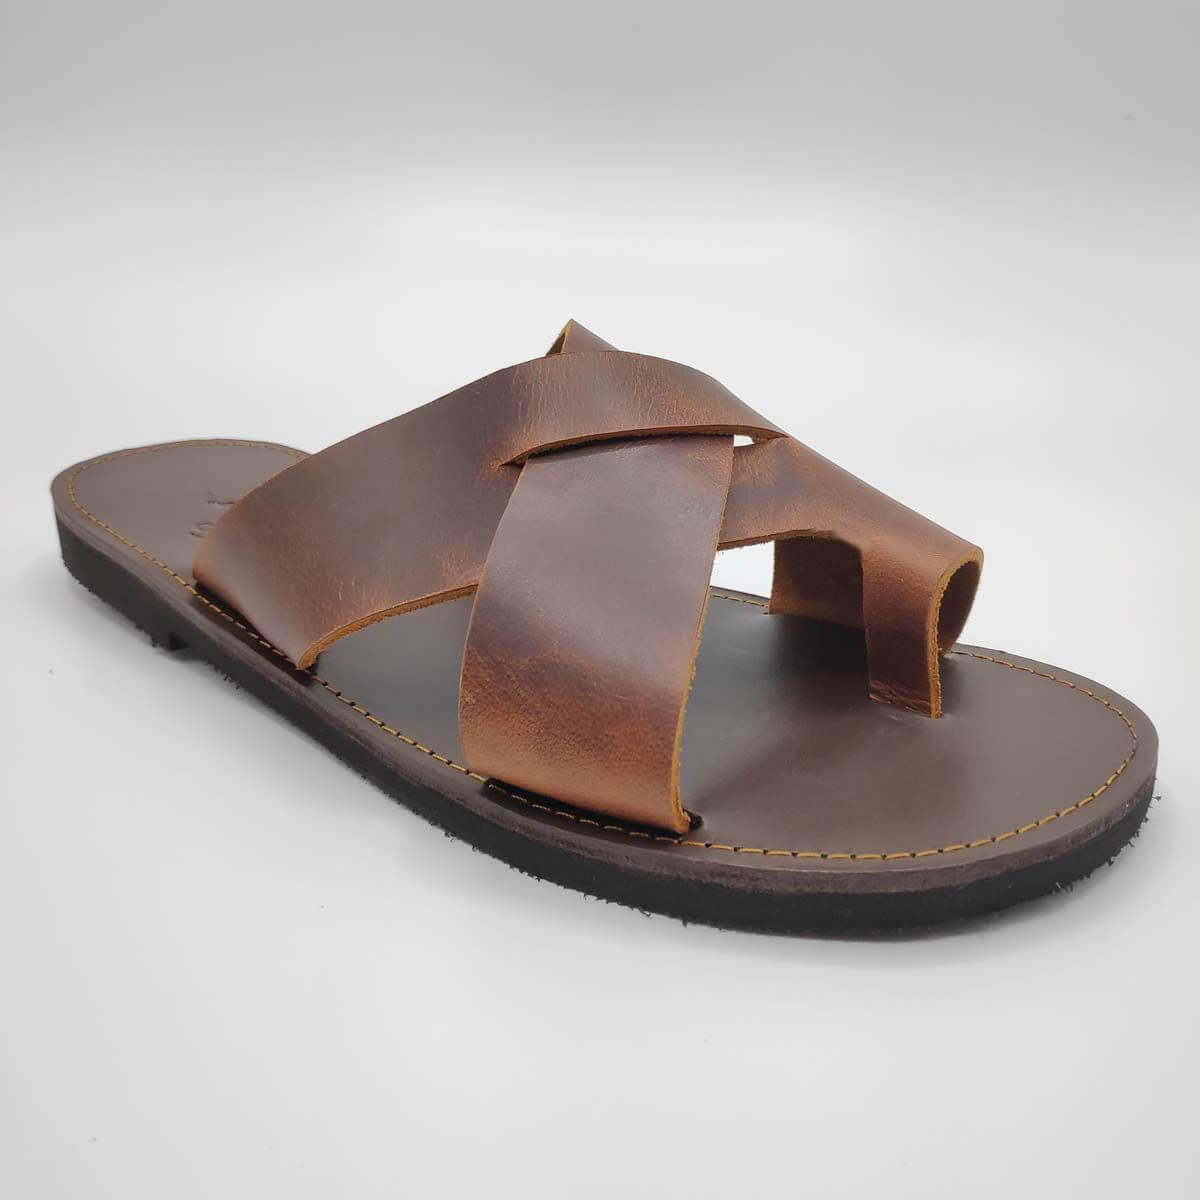 Handmade Leather Sandals Brown & Natural Greek Production Design Ancient Style 